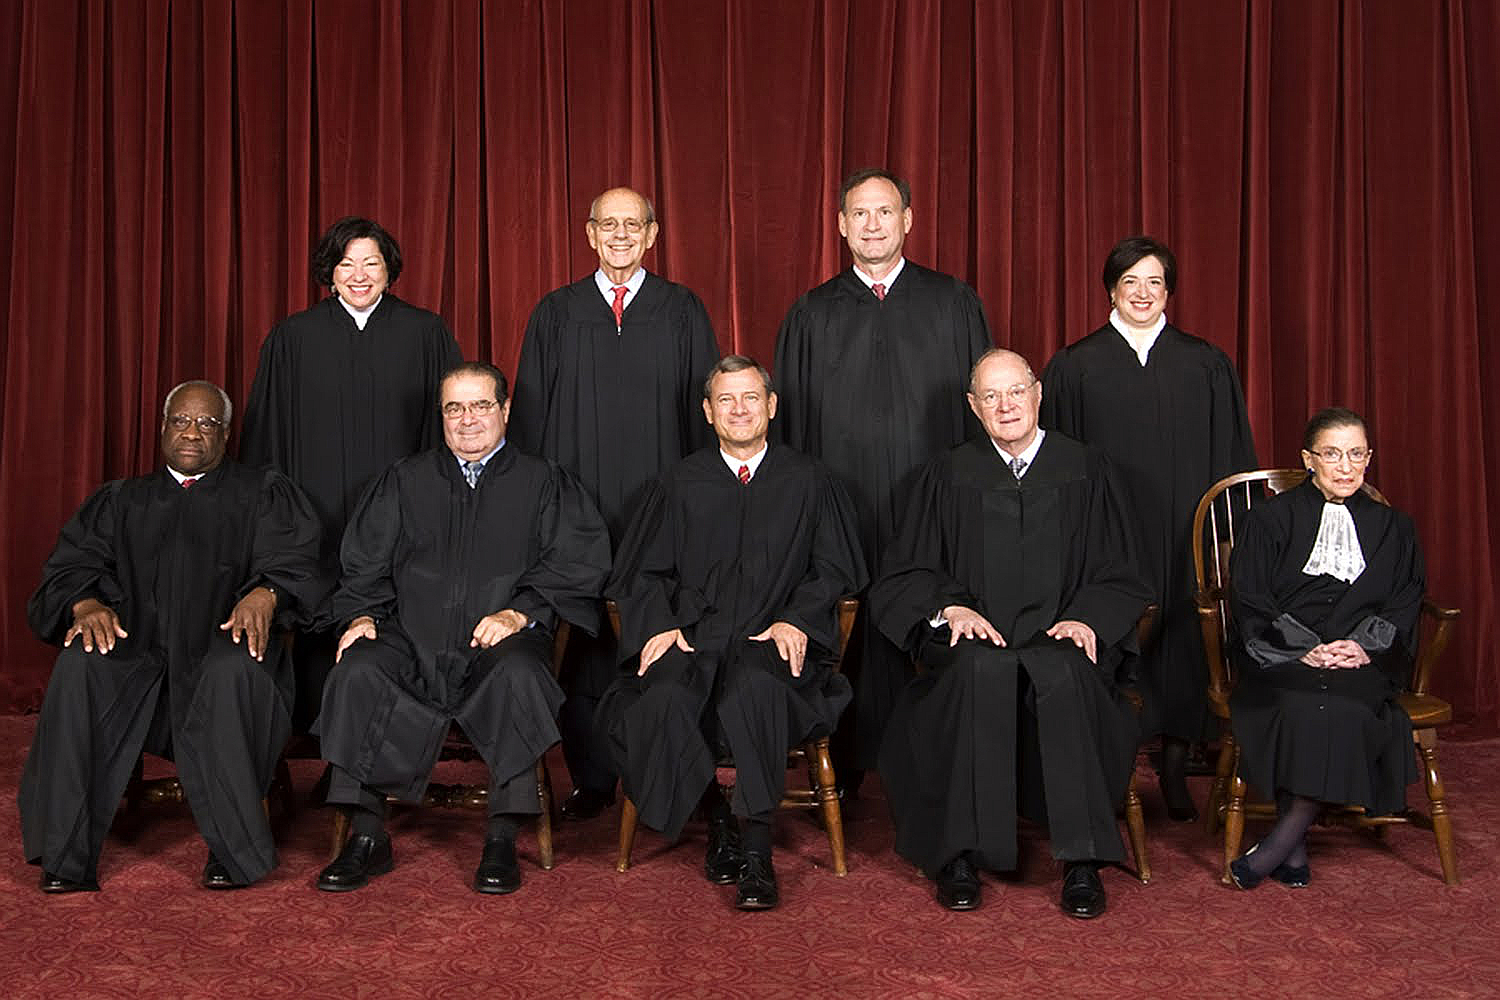 The justices of the Supreme Court of the United States, taken prior to the death of Antonin Scalia in February